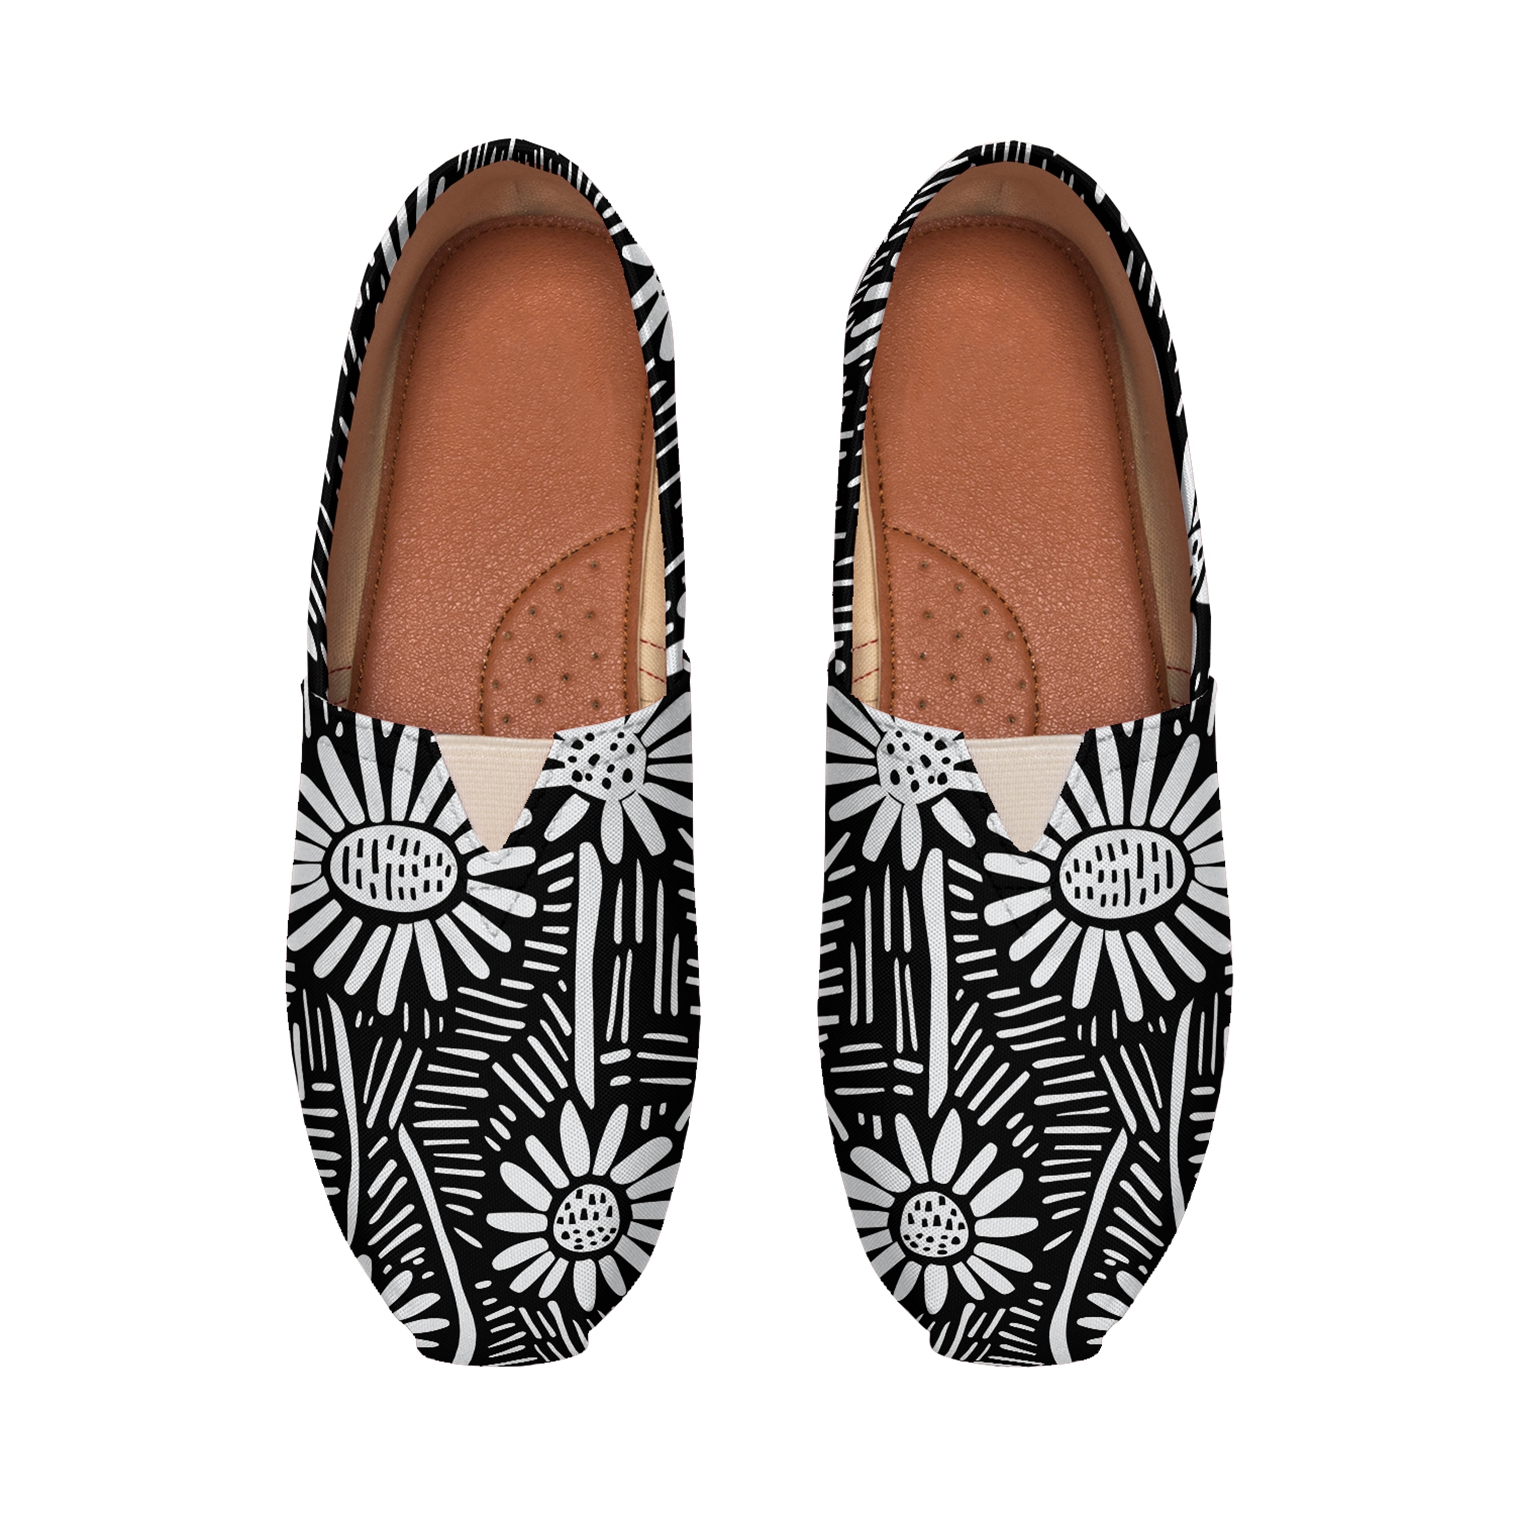 Women's fashion black and white daisy painted print flat canvas slippers casual shoes light and comfortable travel shoes